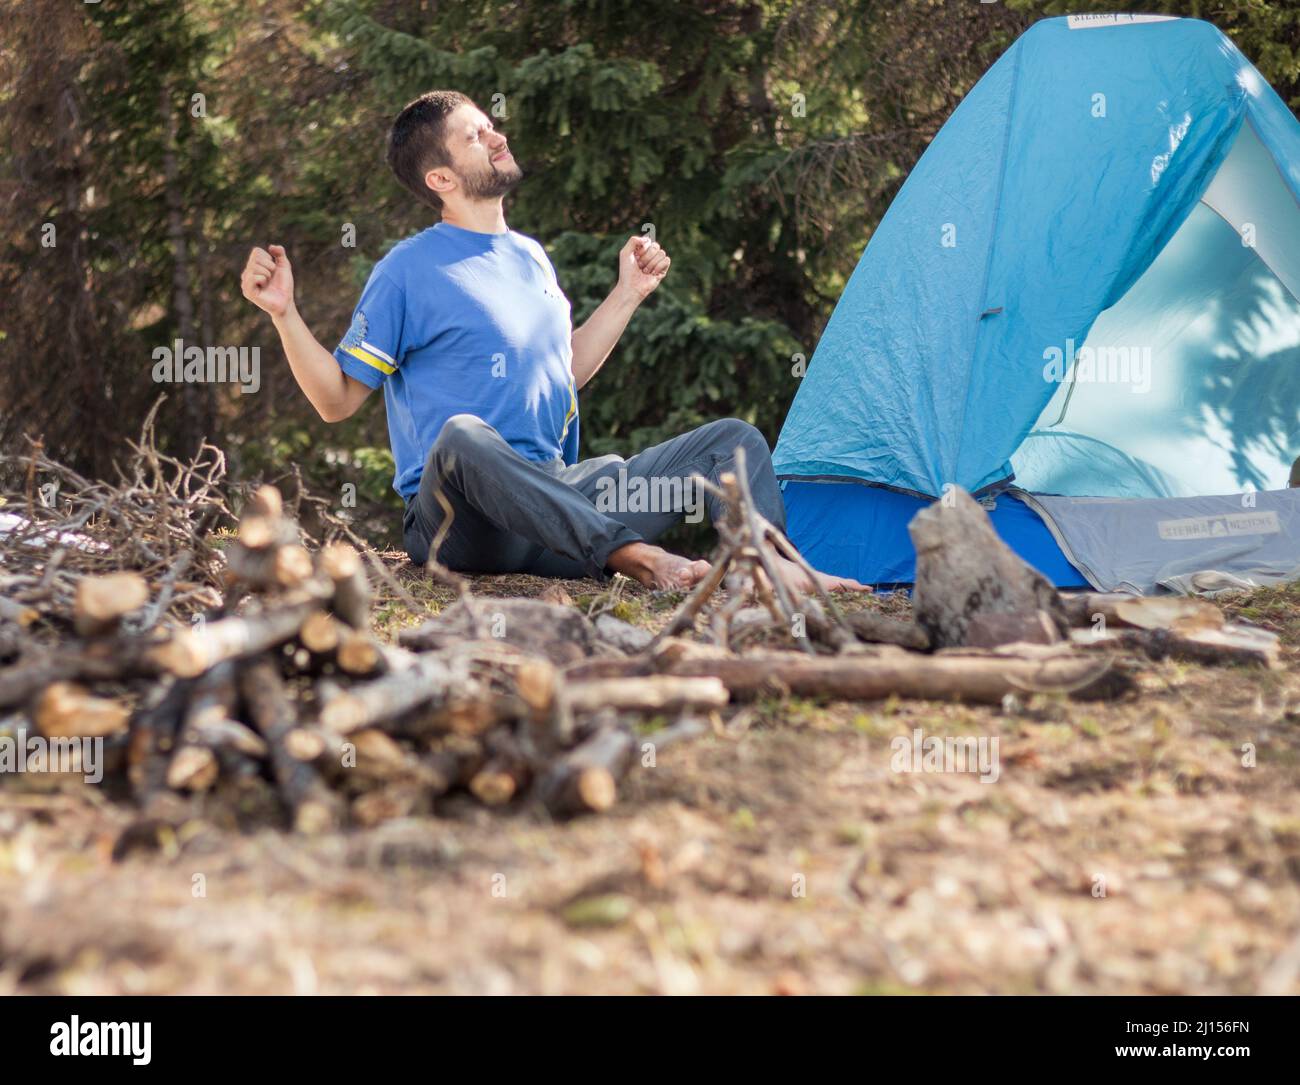 Outdoorsy guy stretching at campsite in the forest Stock Photo - Alamy